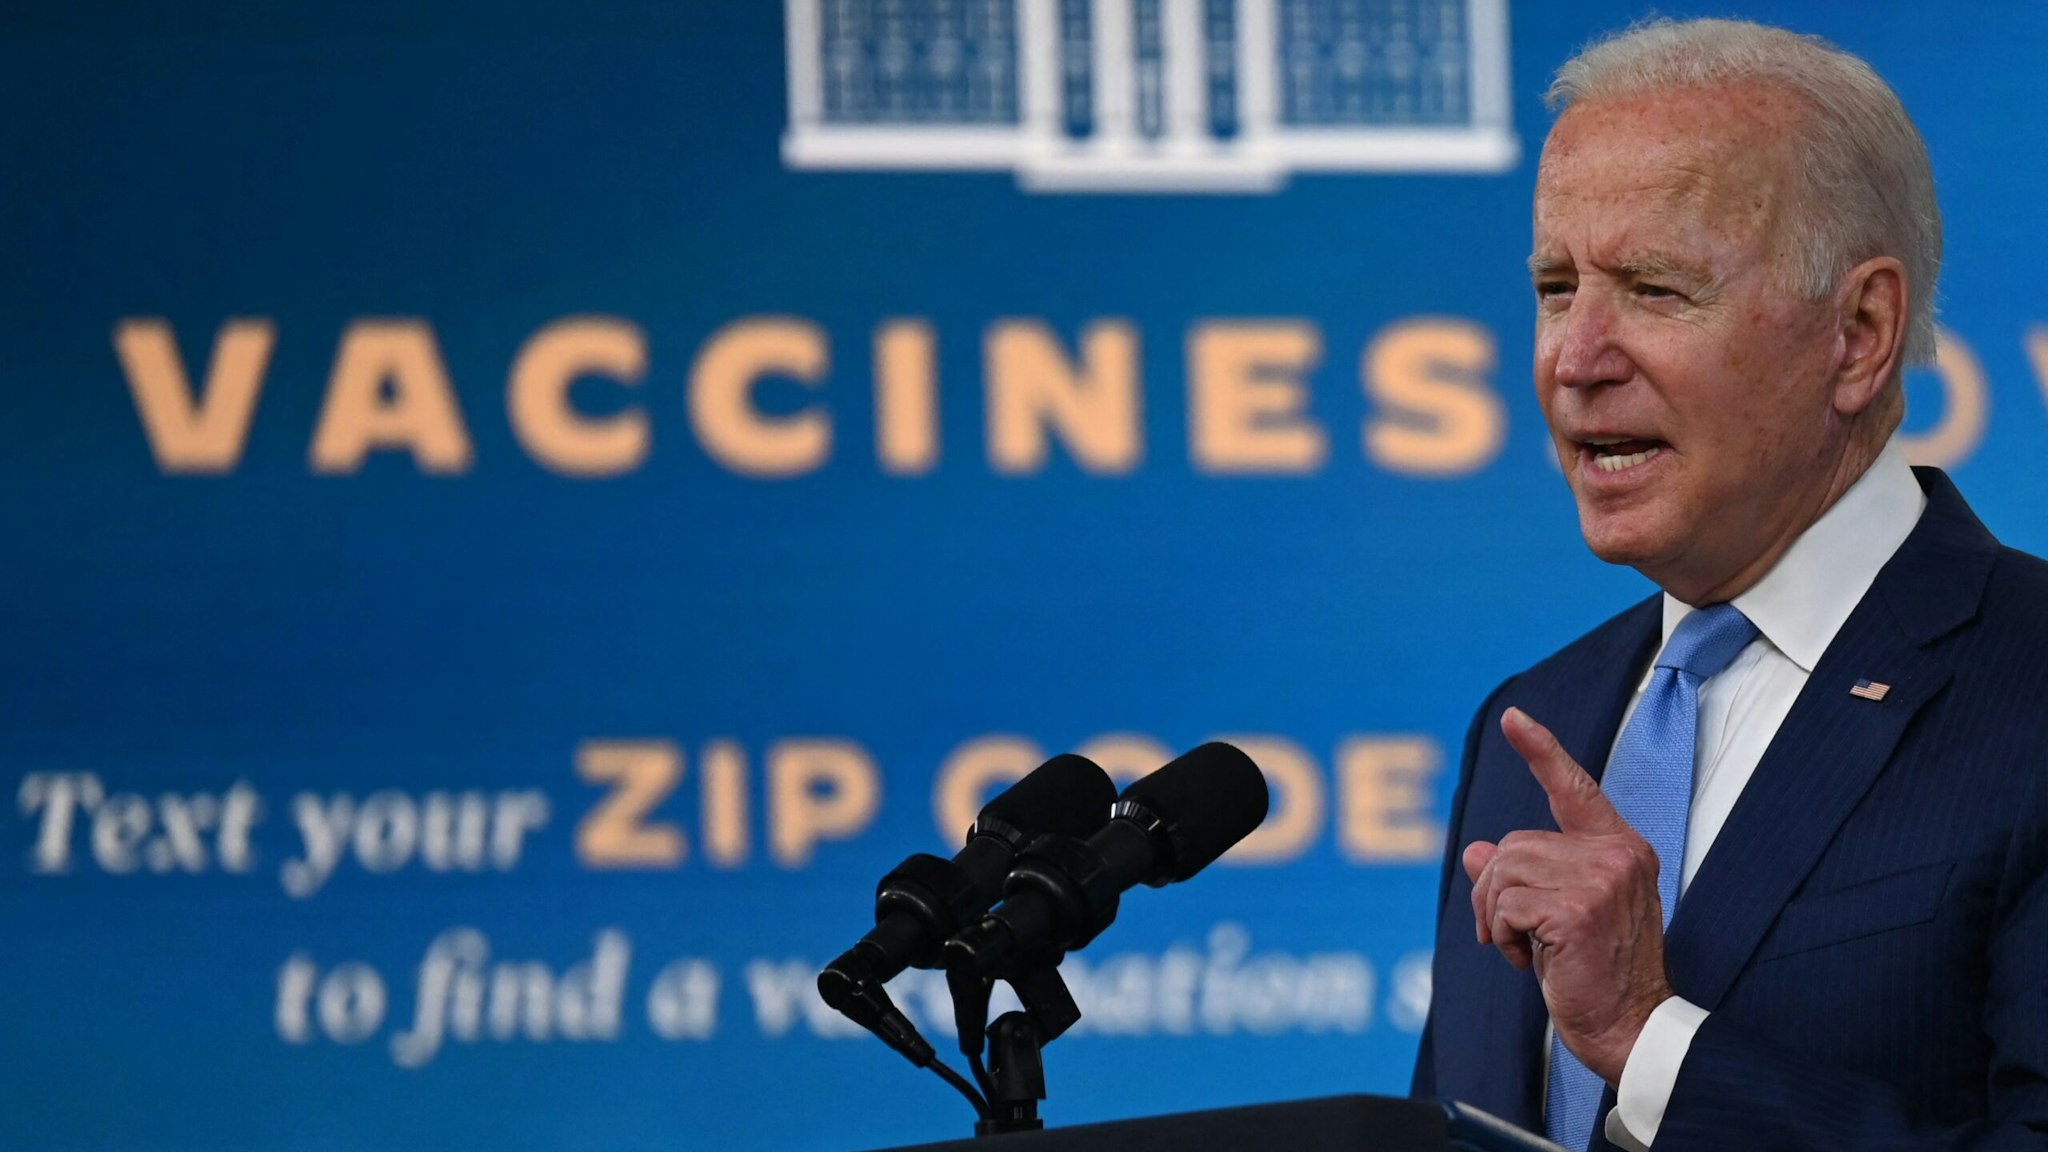 US President Joe Biden delivers remarks on the Covid-19 response and the vaccination program at the White House on August 23, 2021 in Washington,DC. - The US Food and Drug Administration on Monday fully approved the Pfizer-BioNTech Covid vaccine, a move that triggered a new wave of vaccine mandates as the Delta variant batters the country.Around 52 percent of the American population is fully vaccinated, but health authorities have hit a wall of vaccine hesitant people, impeding the national campaign. (Photo by Jim WATSON / AFP) (Photo by JIM WATSON/AFP via Getty Images)